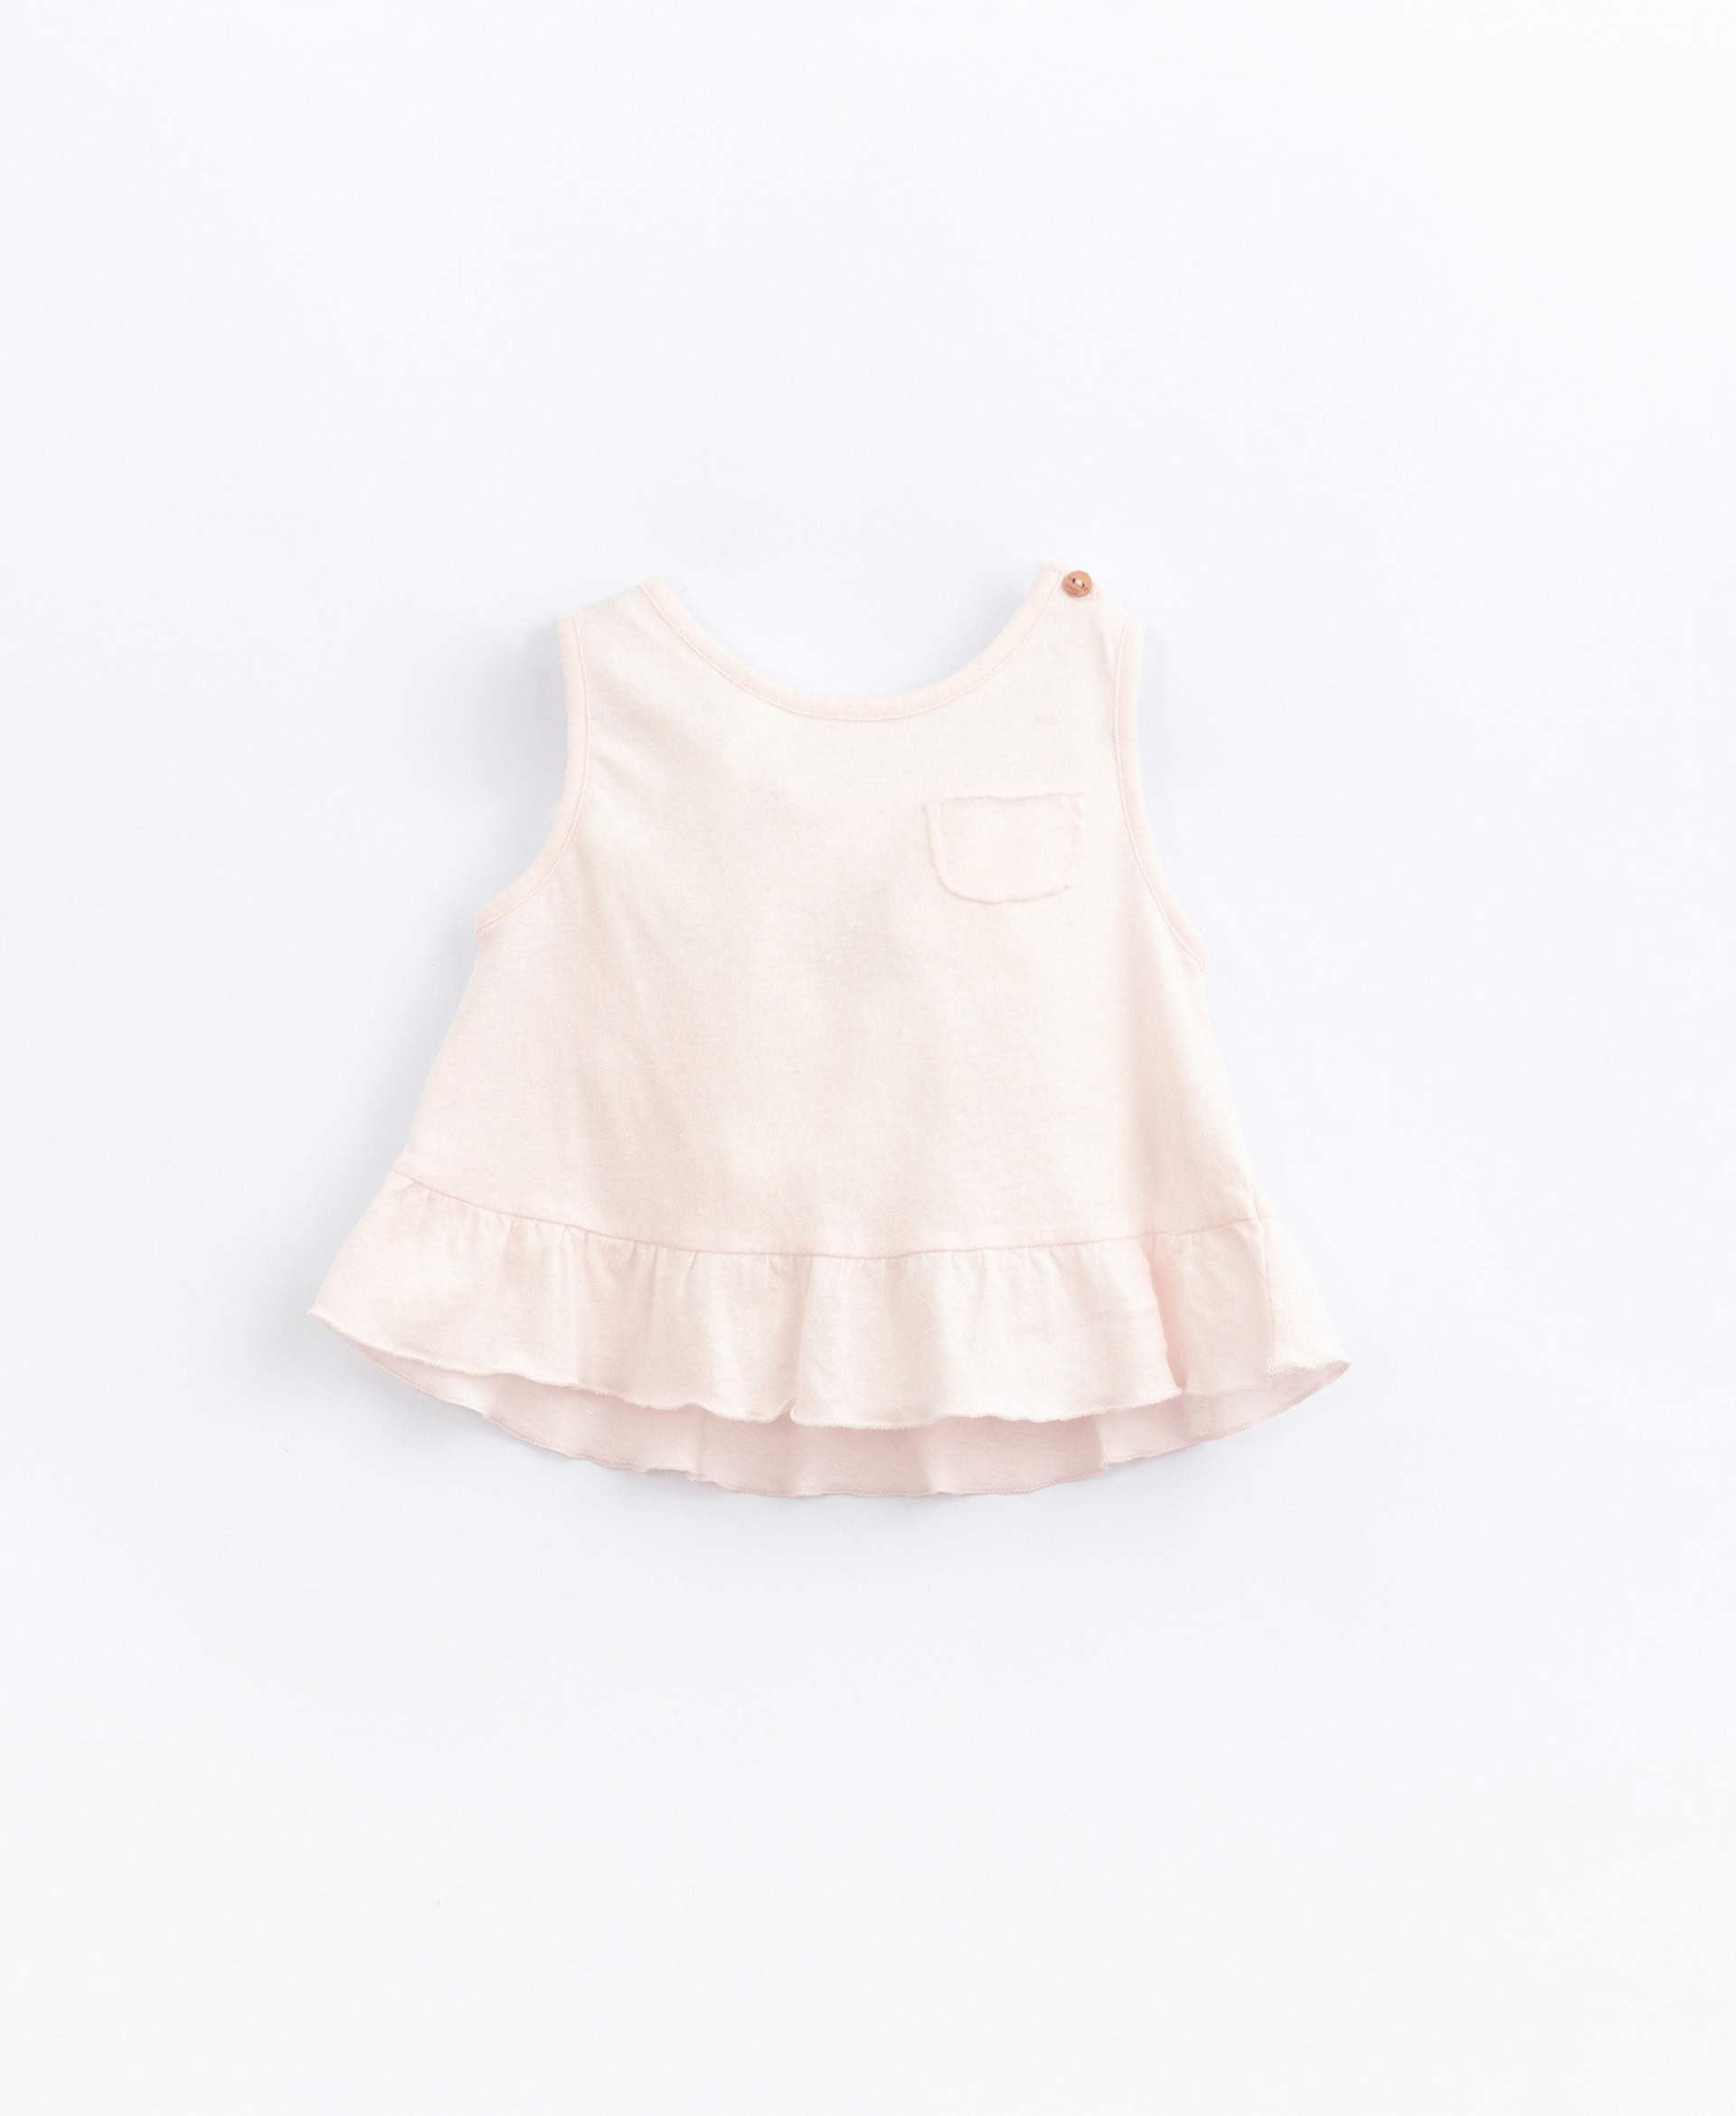 Top with ruffle in-set | Basketry